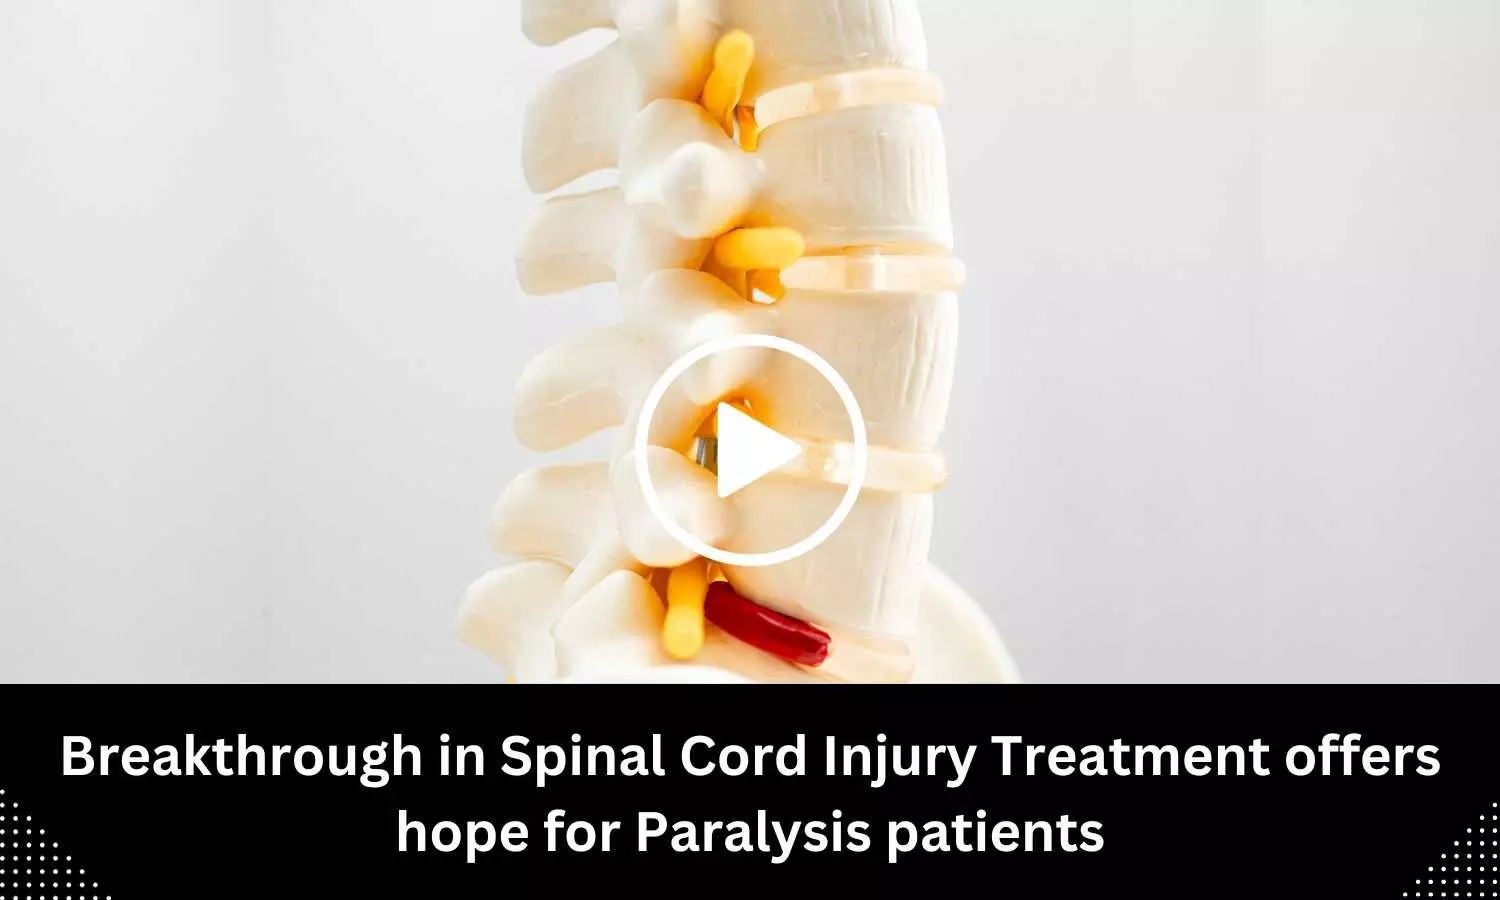 Breakthrough in Spinal Cord Injury Treatment offers hope for Paralysis patients